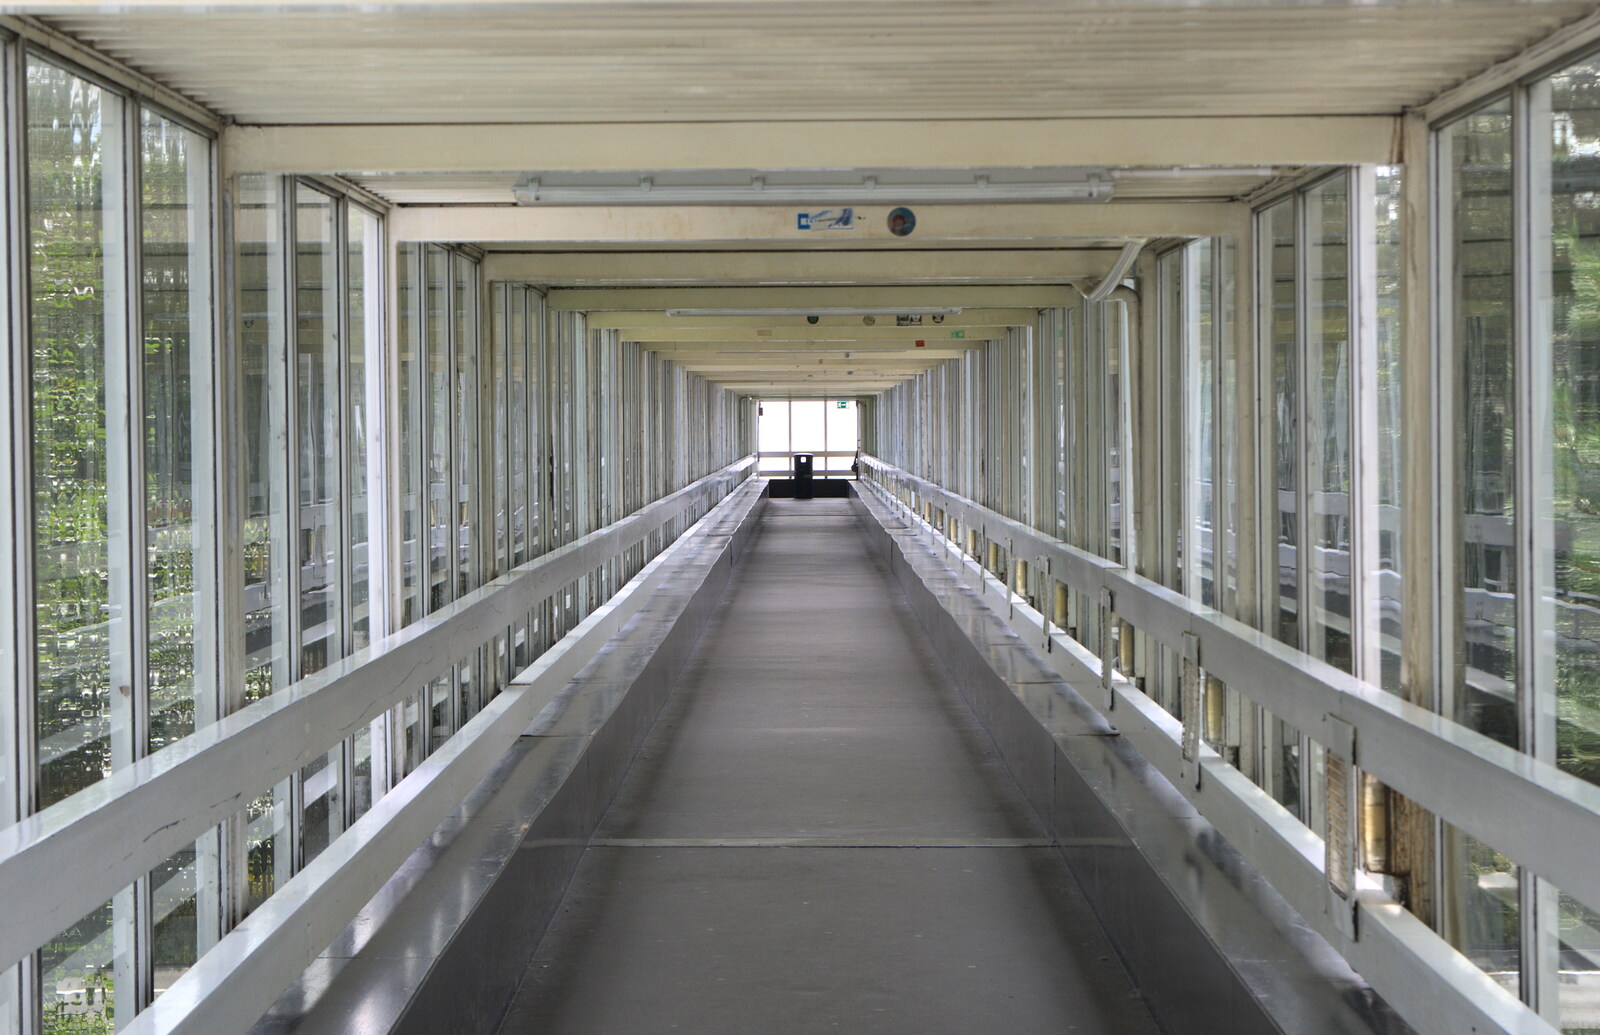 Fleet Services 'time-warp' link bridge over the M3 from Bob and Bernice's 50th Wedding Anniversary, Hinton Admiral, Dorset - 25th July 2014